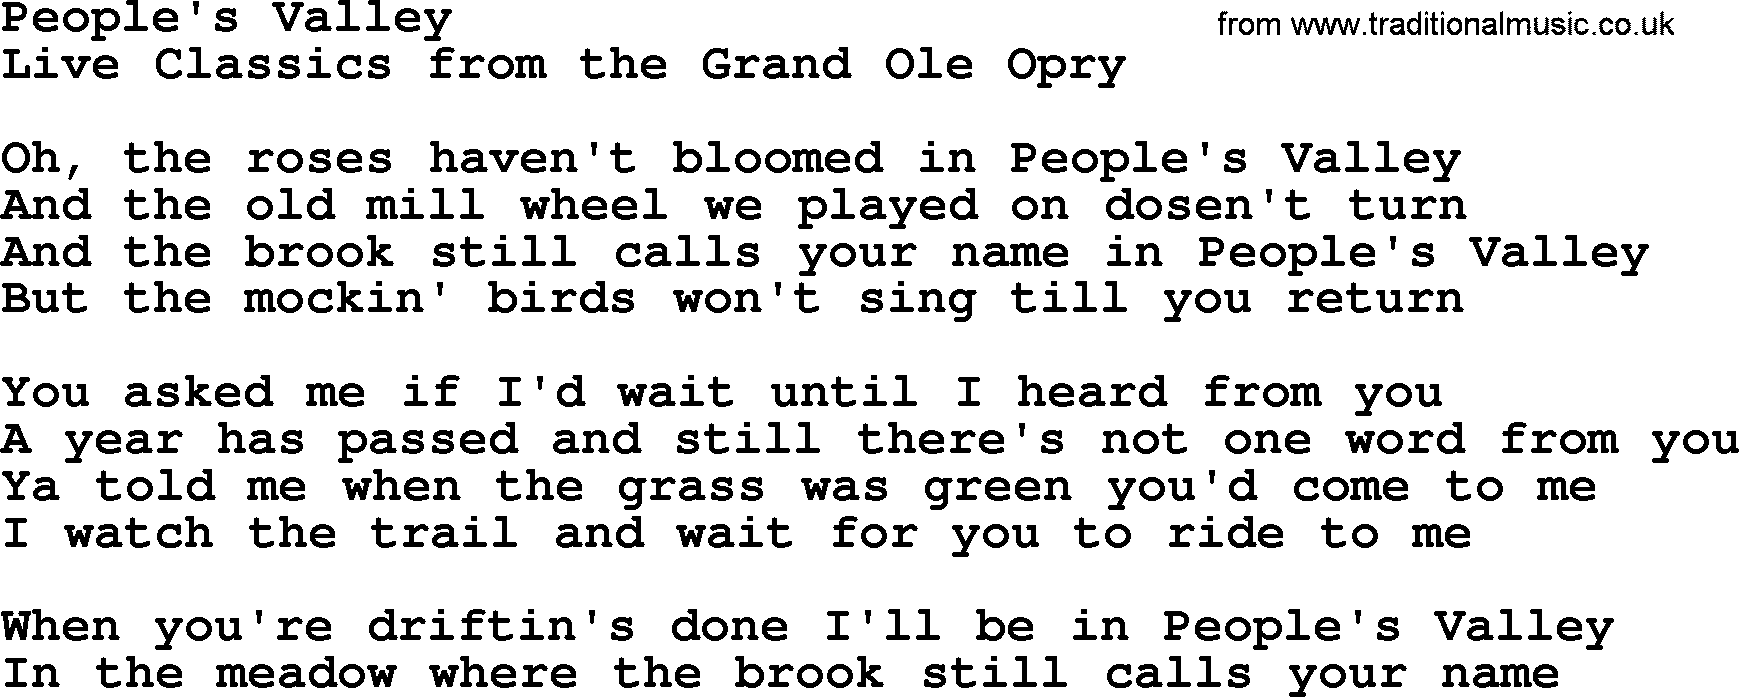 Marty Robbins song: Peoples Valley, lyrics